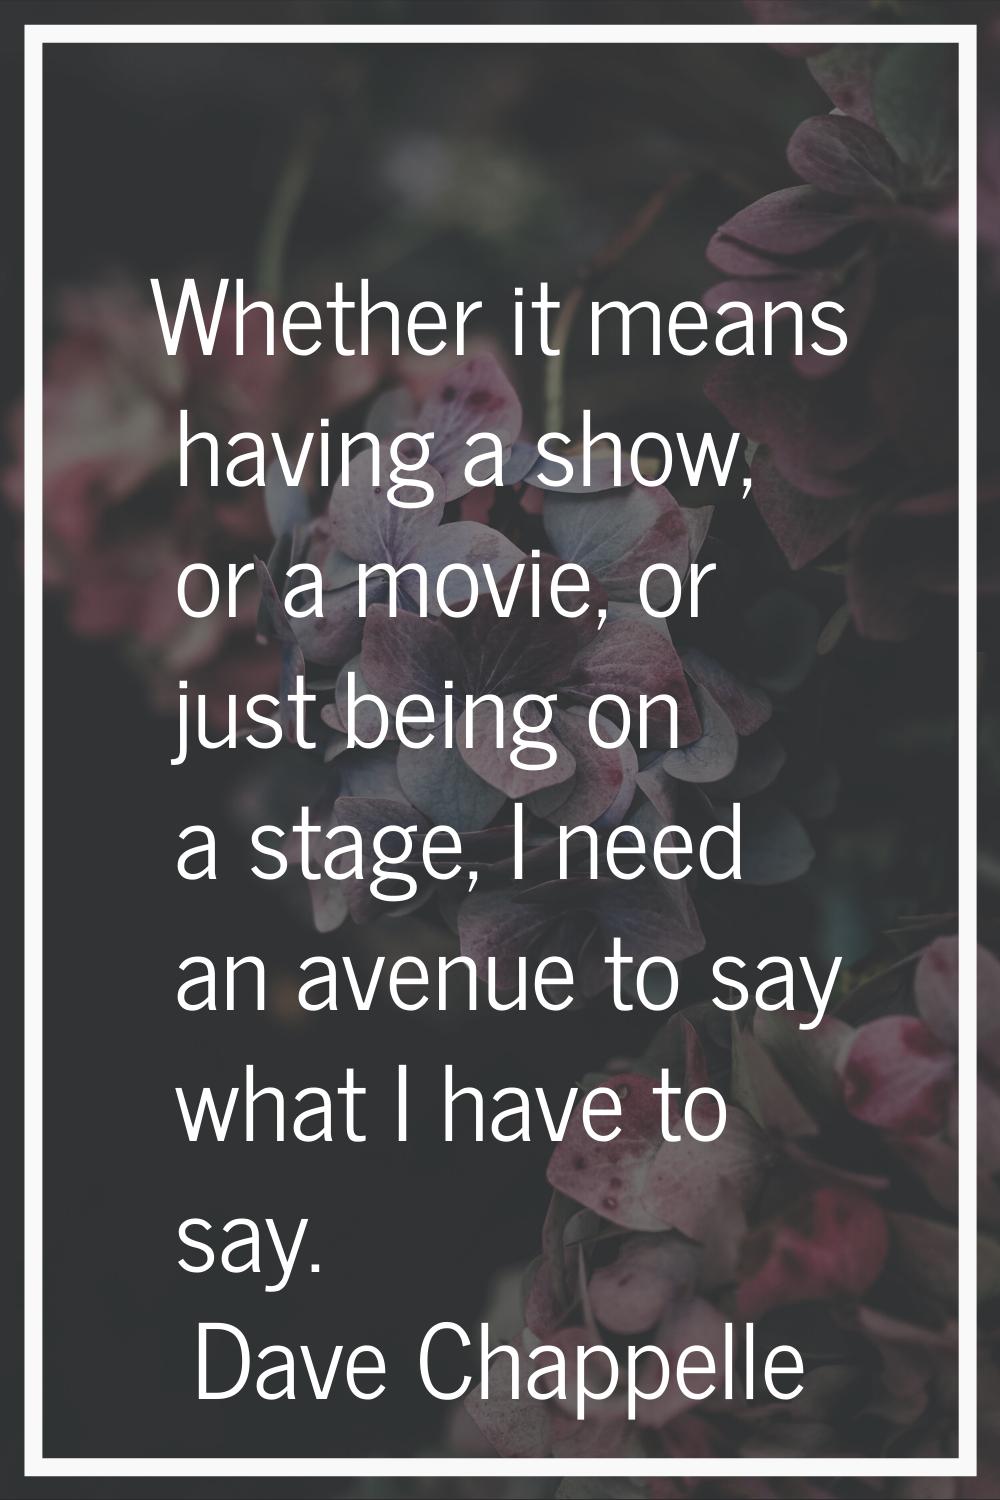 Whether it means having a show, or a movie, or just being on a stage, I need an avenue to say what 